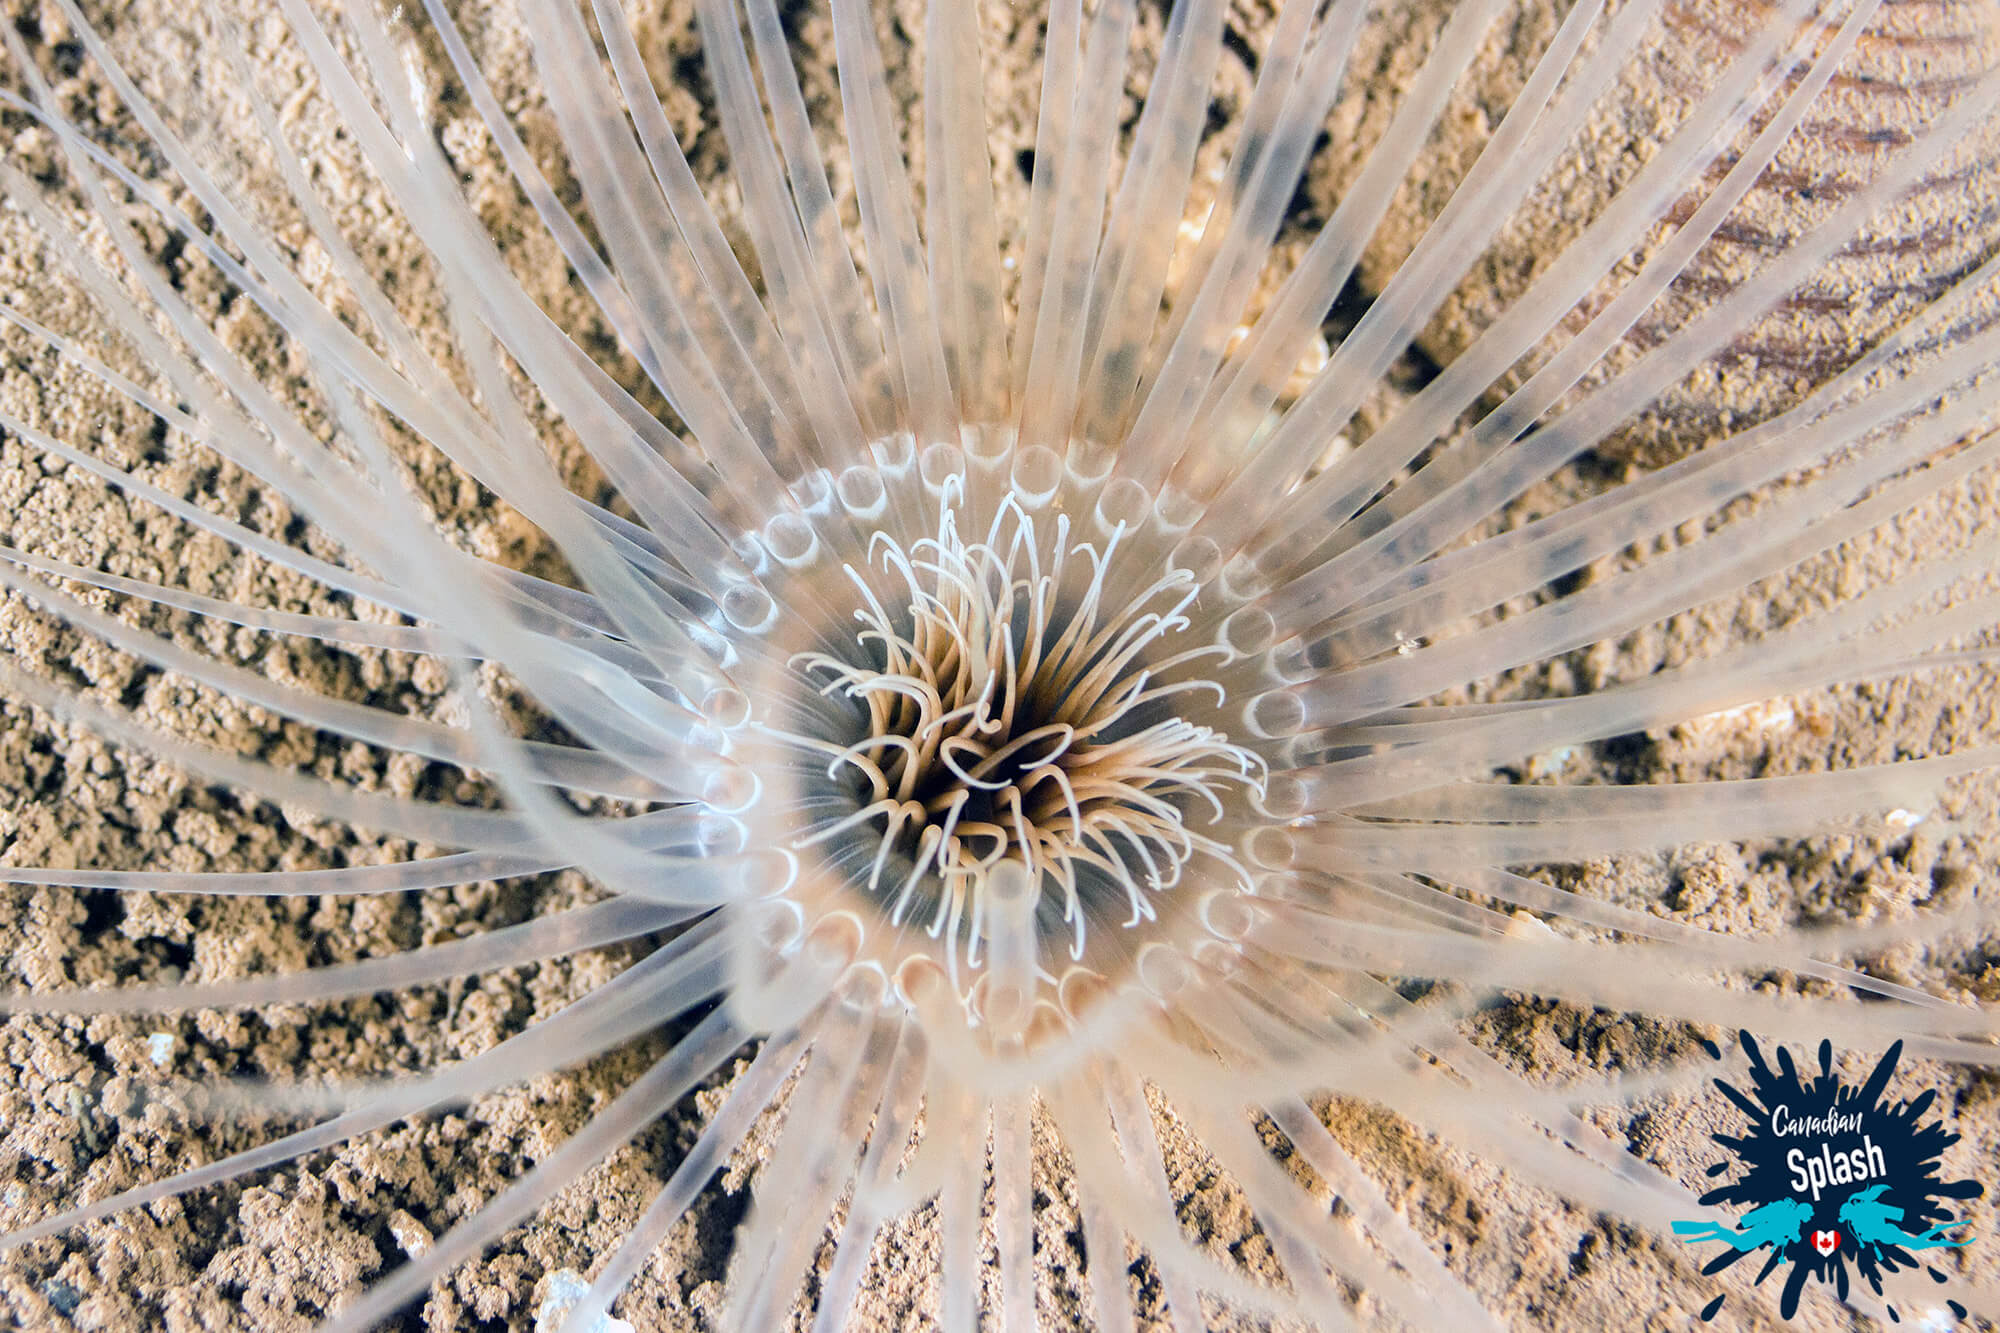 Burrowing Anemone In The Muck At A Saint Andrews Shore Diving Site In New Brunswick, Canadian Splash Scuba Diving